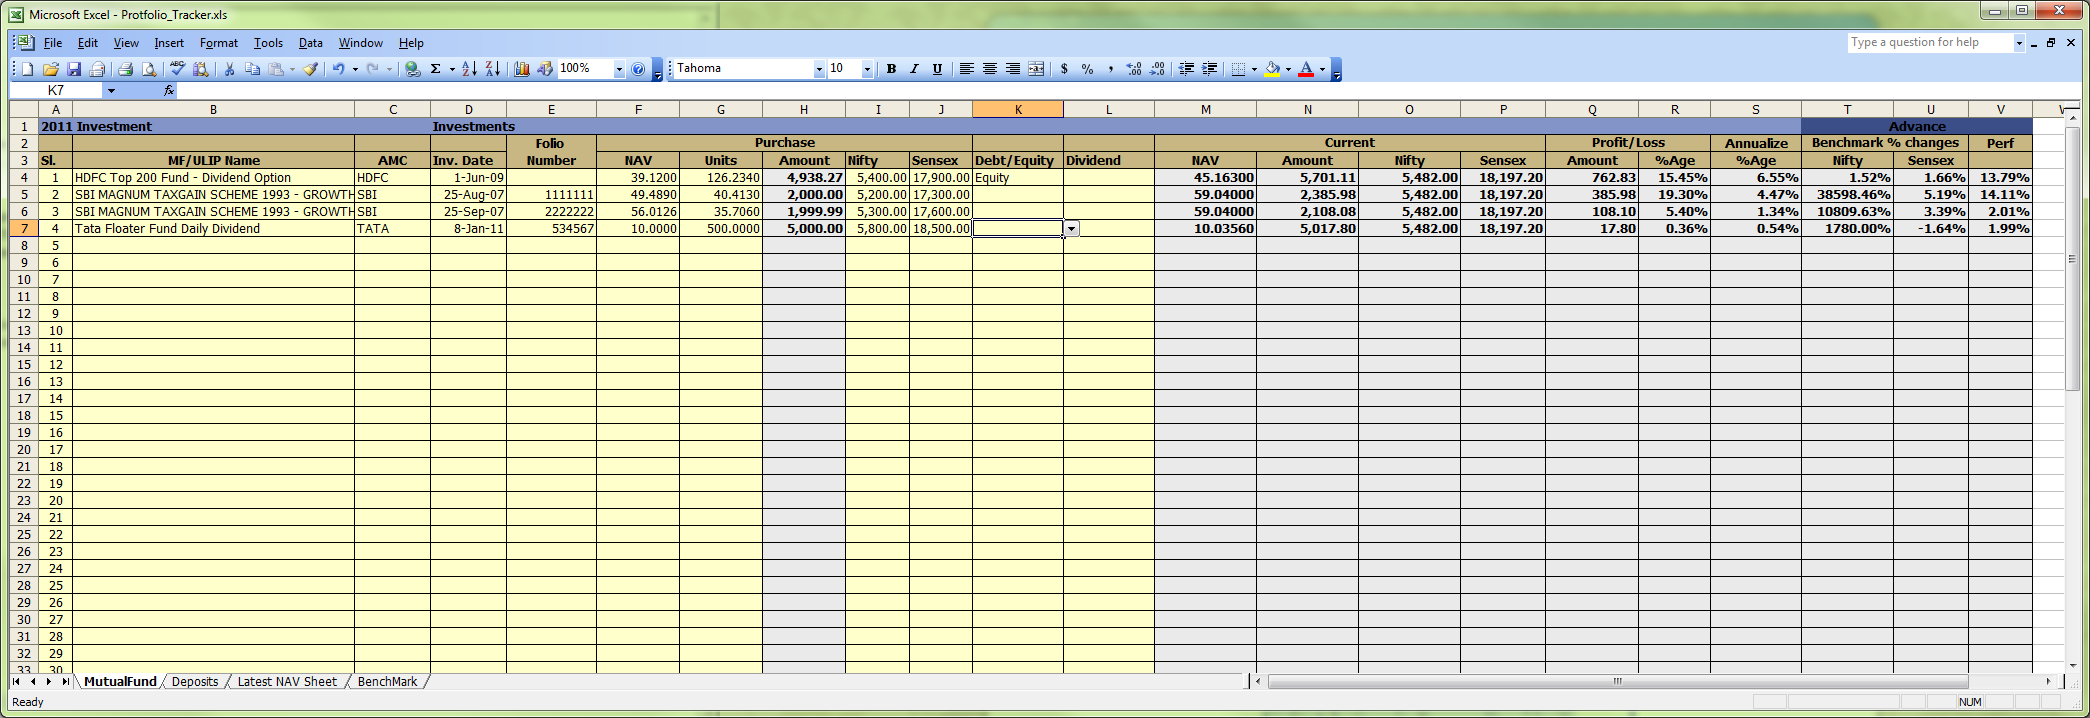 Loan Tracking Spreadsheet Template Throughout Spreadsheet Example Of Procurement Tracking Excel 365147 Loan